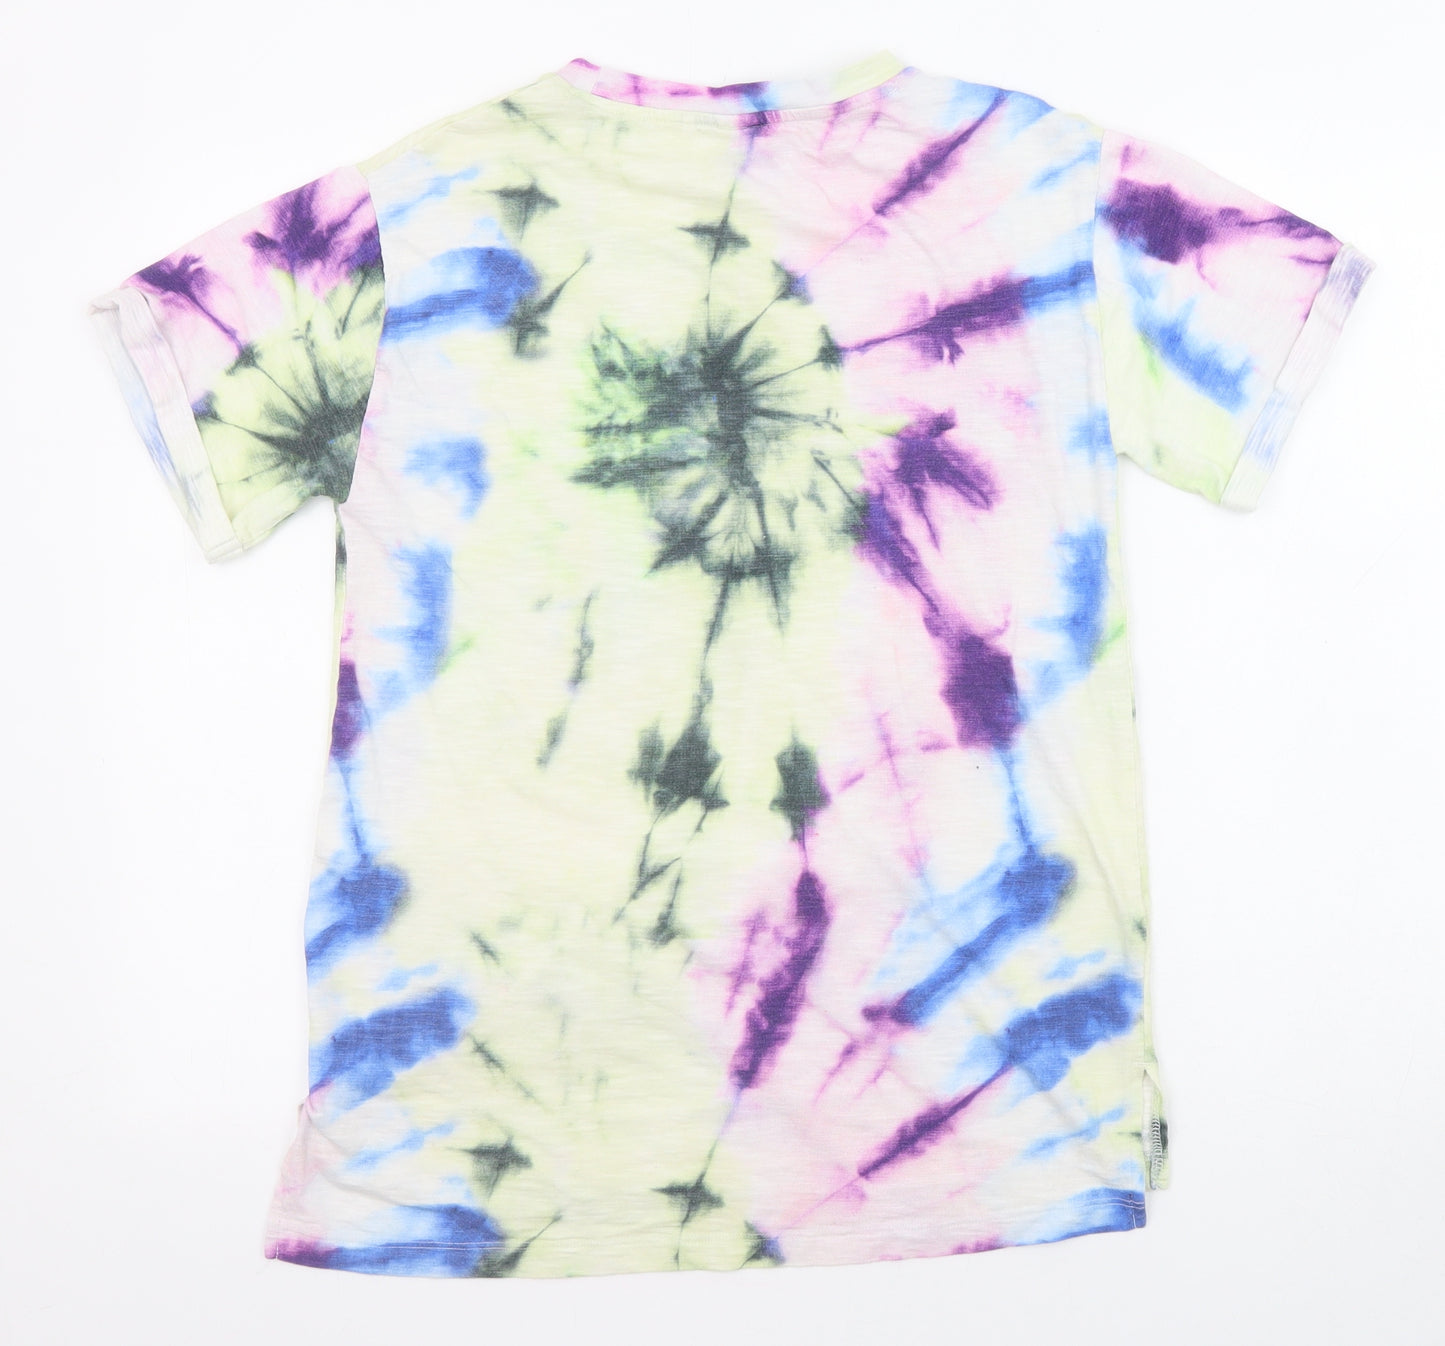 NEXT Girls Multicoloured Geometric Cotton Basic T-Shirt Size 12 Years Round Neck Pullover - Tie Dye Effect, Love Your Mother Earth